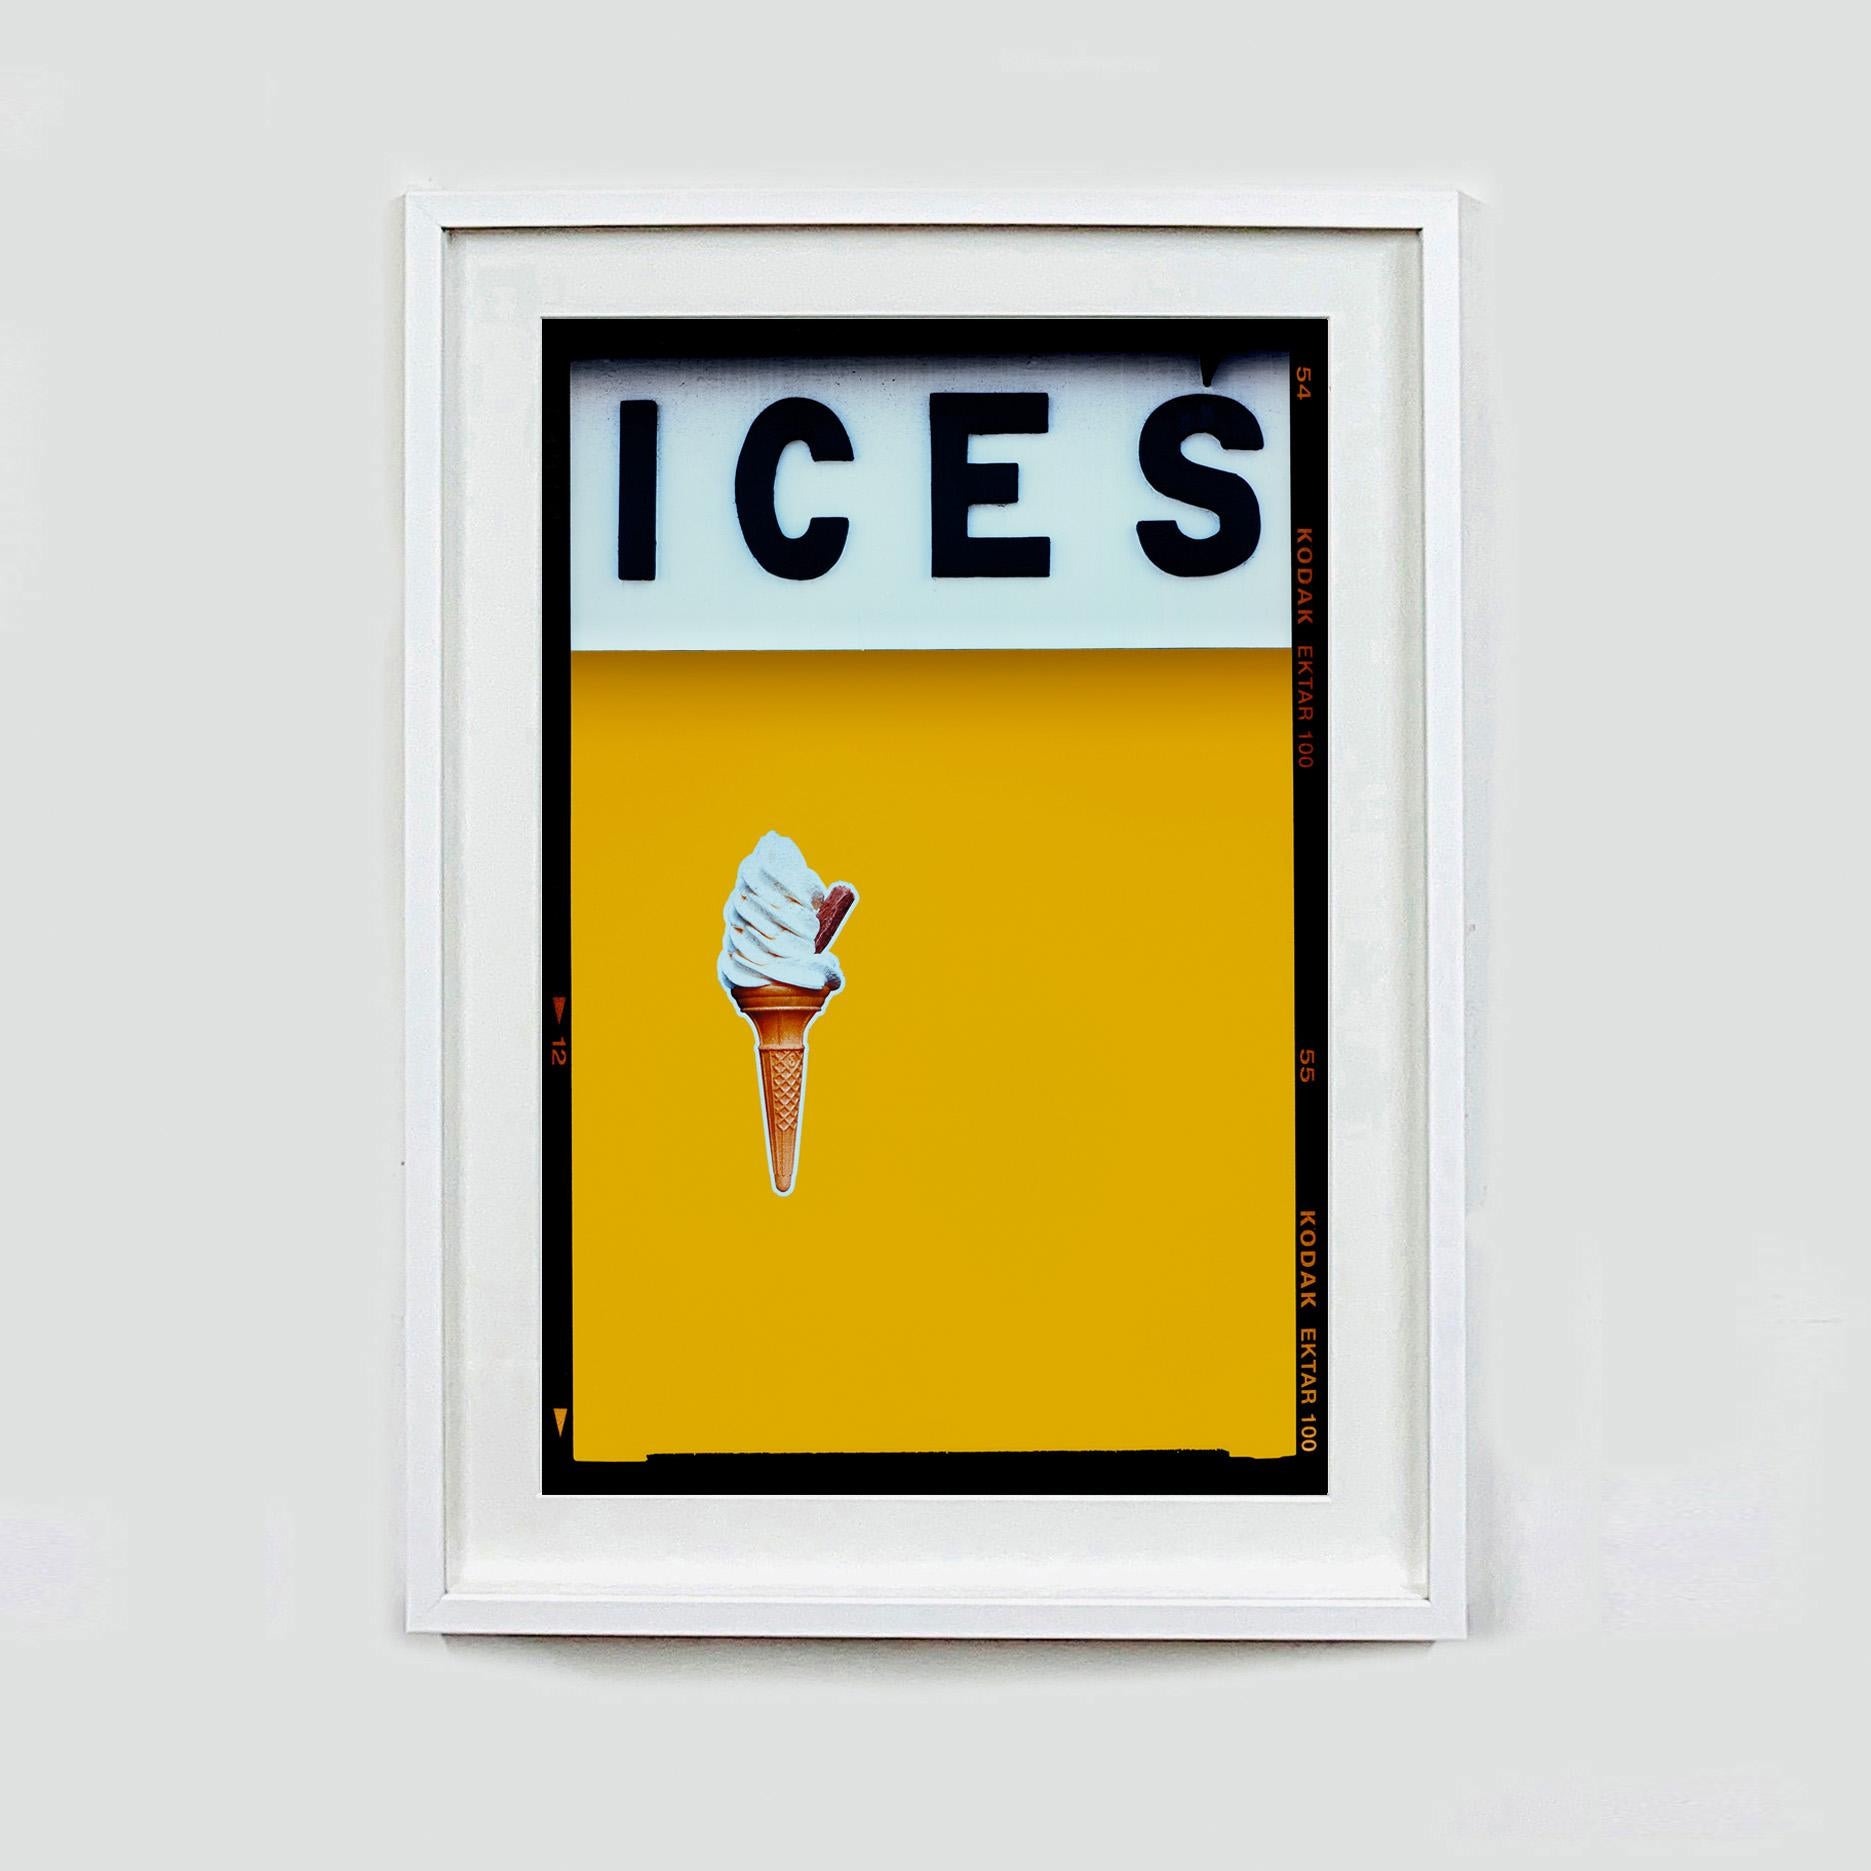 Ices (Mustard Yellow), Bexhill-on-Sea - British Pop Art Color Photography For Sale 2